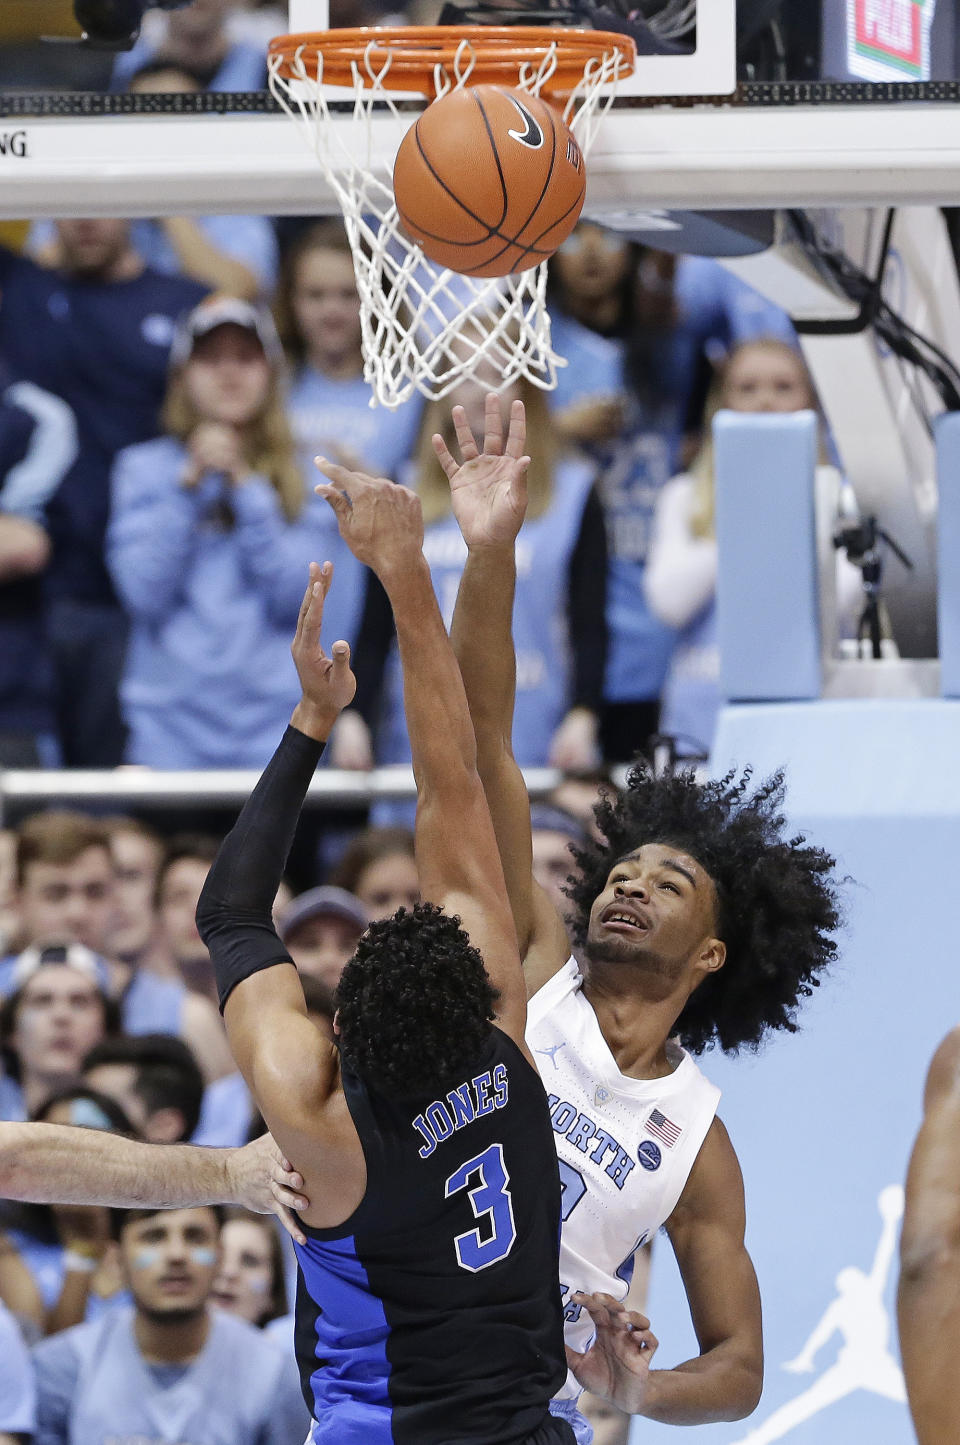 North Carolina's Coby White defends as Duke's Tre Jones (3) drives to the basket during the first half of an NCAA college basketball game in Chapel Hill, N.C., Saturday, March 9, 2019. (AP Photo/Gerry Broome)